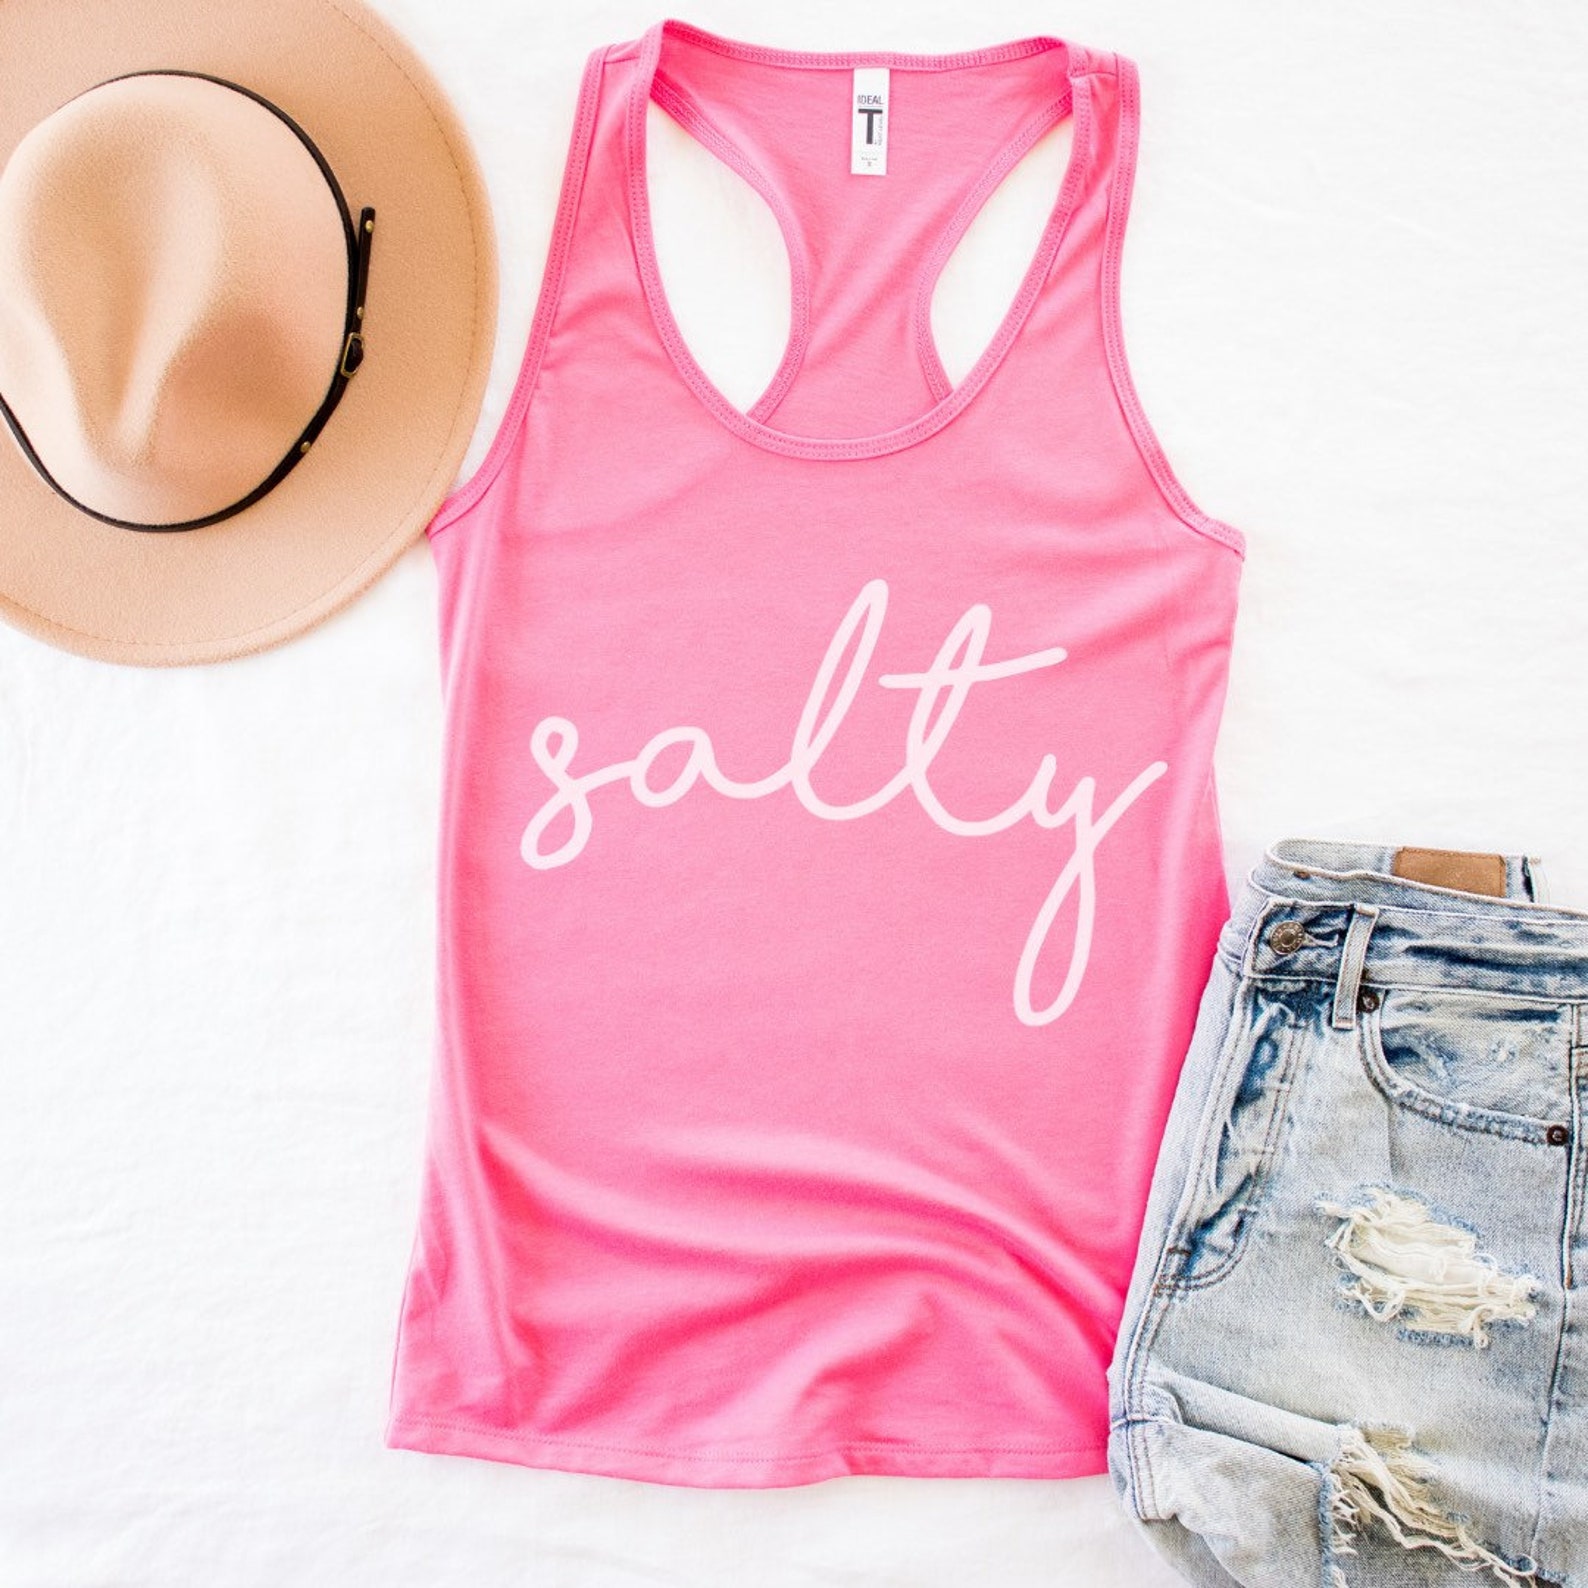 Salty Tank Top Beach Tank Tops for Women Gift for Beach | Etsy